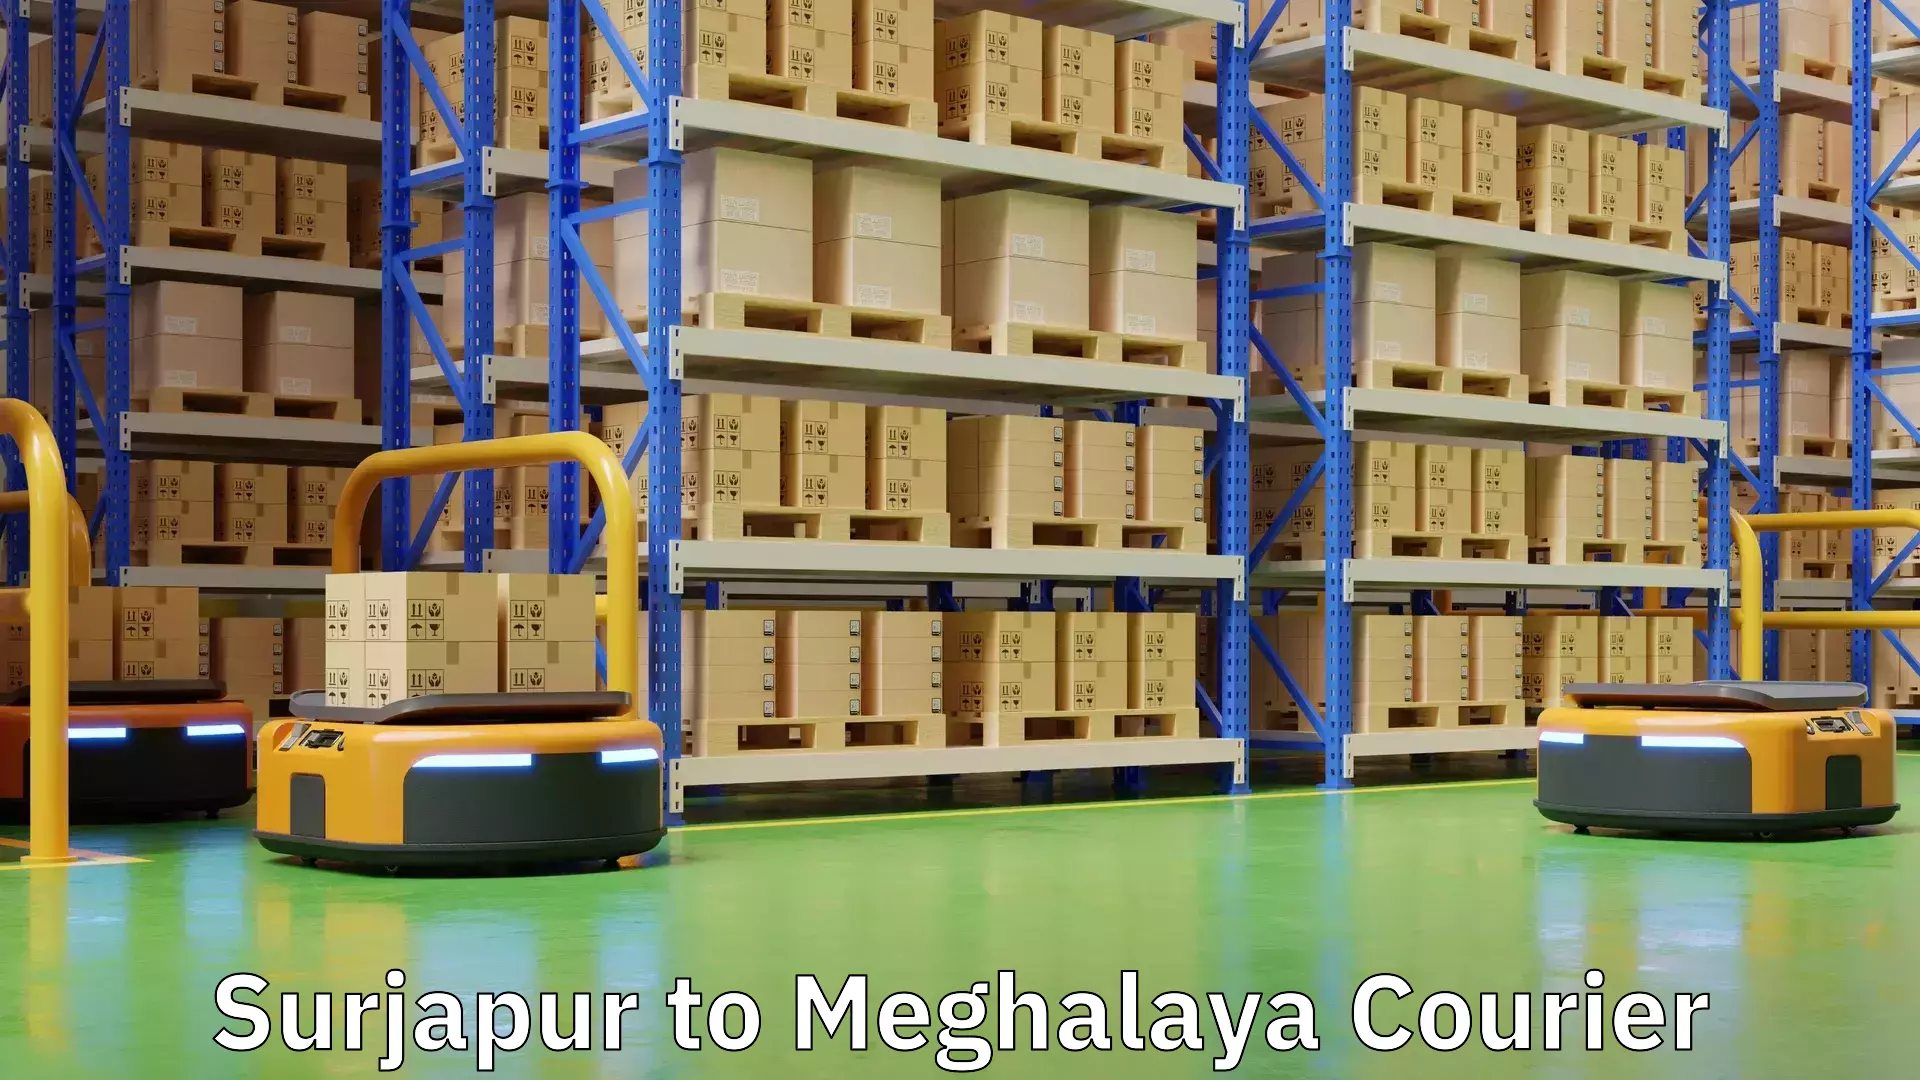 Cargo delivery service in Surjapur to Meghalaya